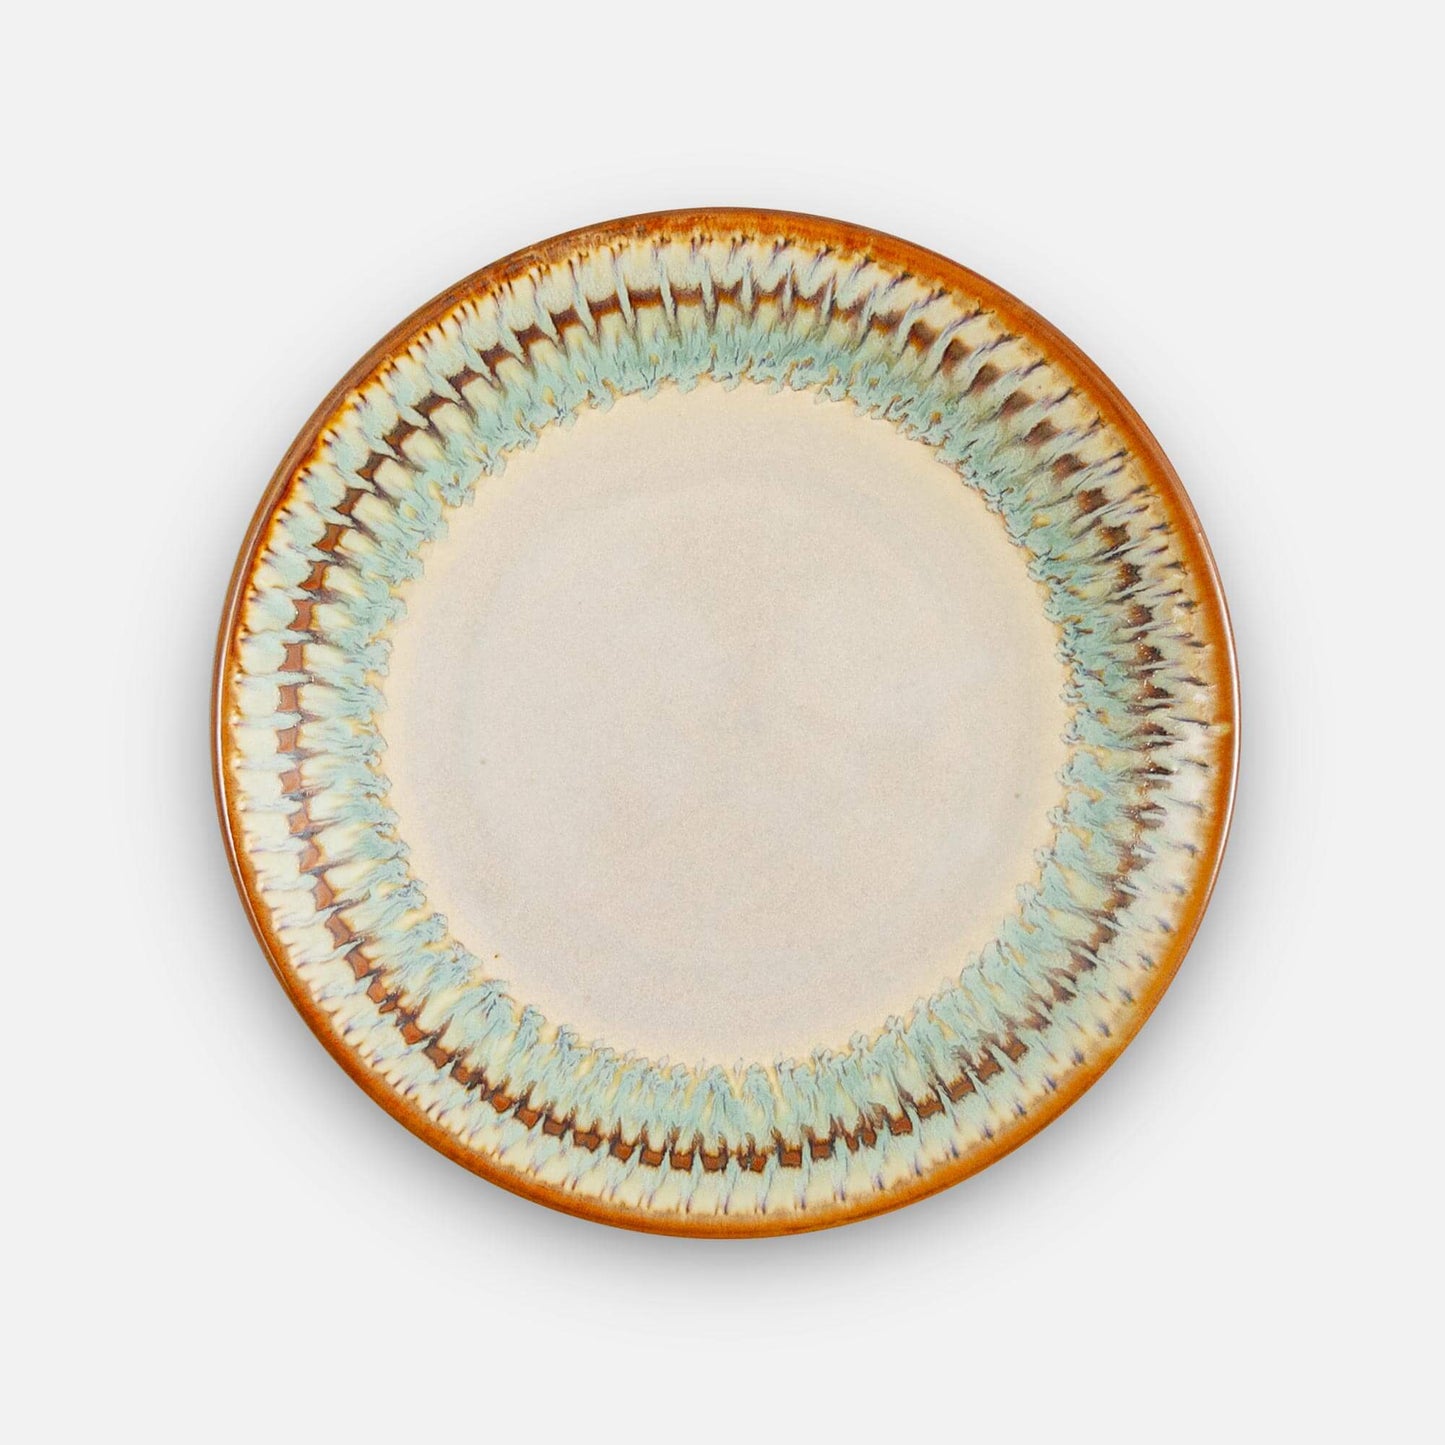 Handmade Pottery Classic Dinner Plate in Ivory & Green pattern made by Georgetown Pottery in Maine